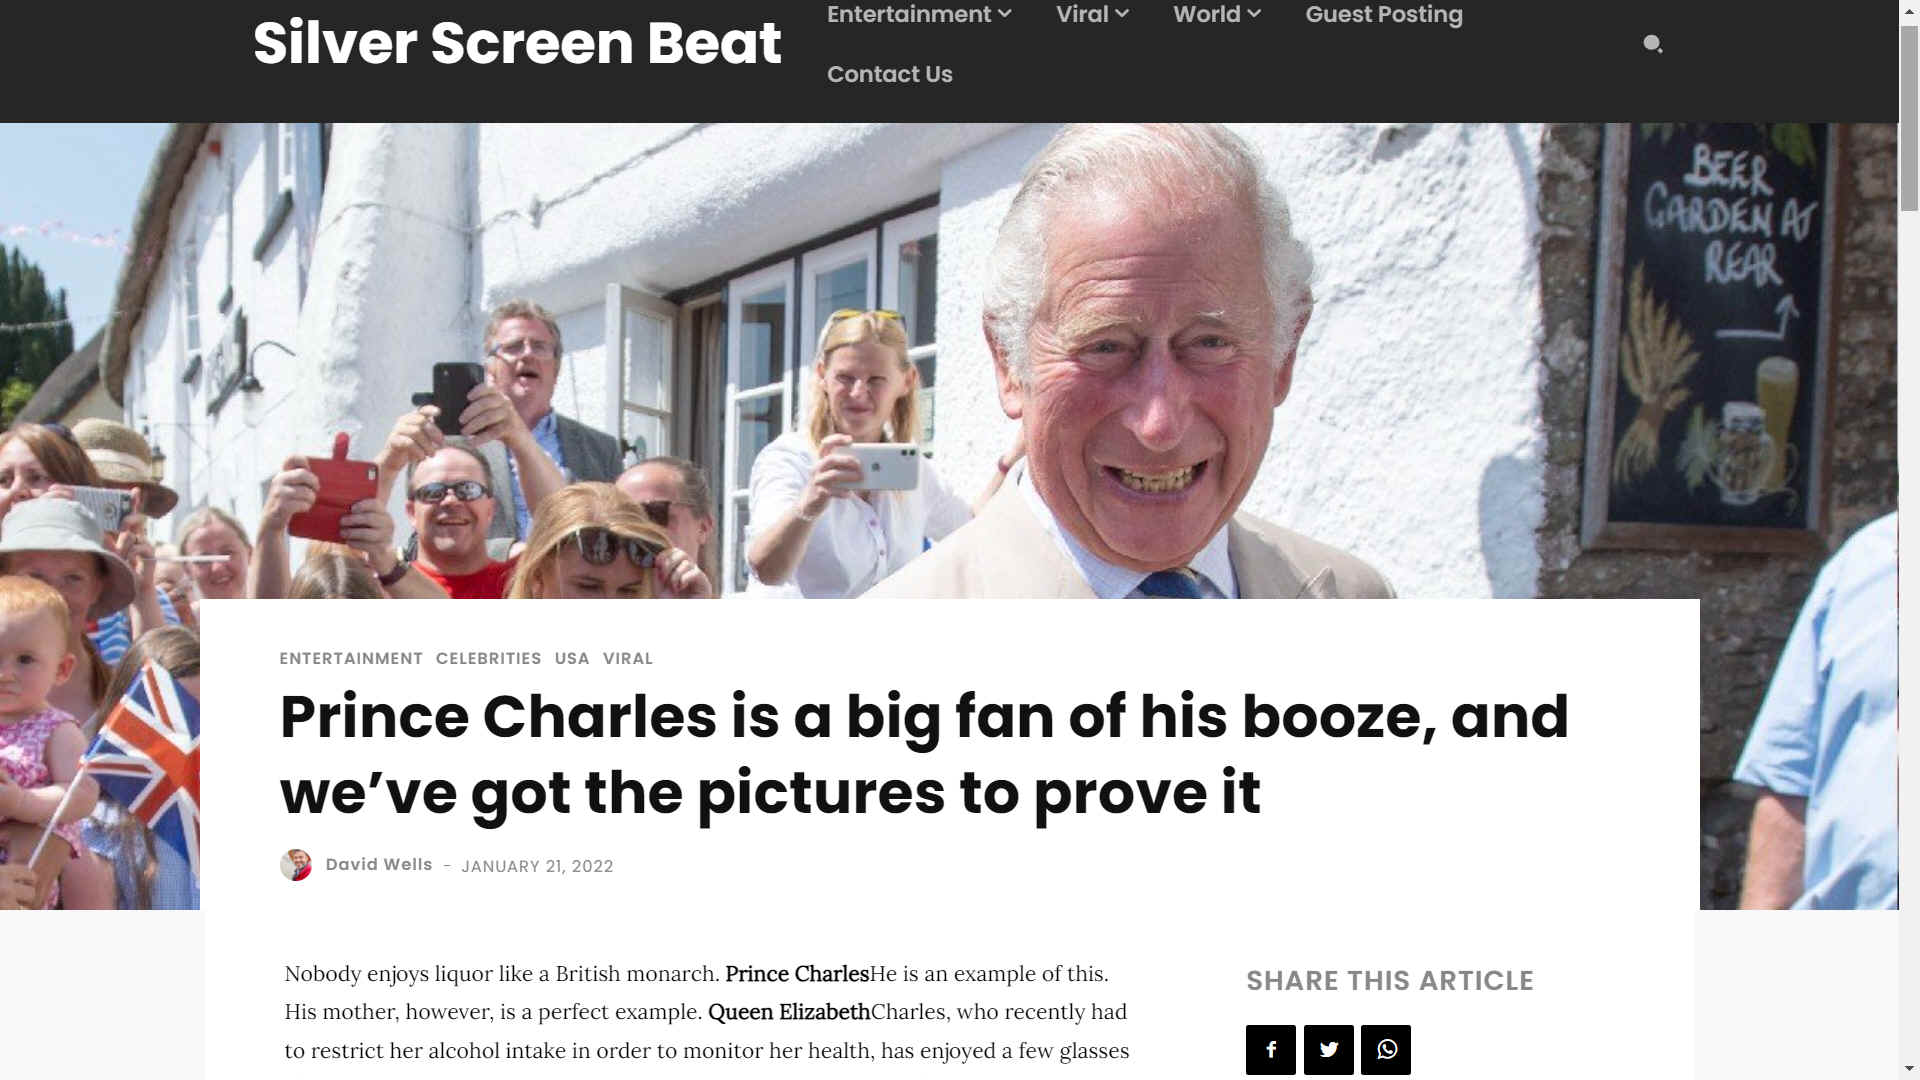 Prince Charles is a big fan of his booze, and here are the pictures to prove it.